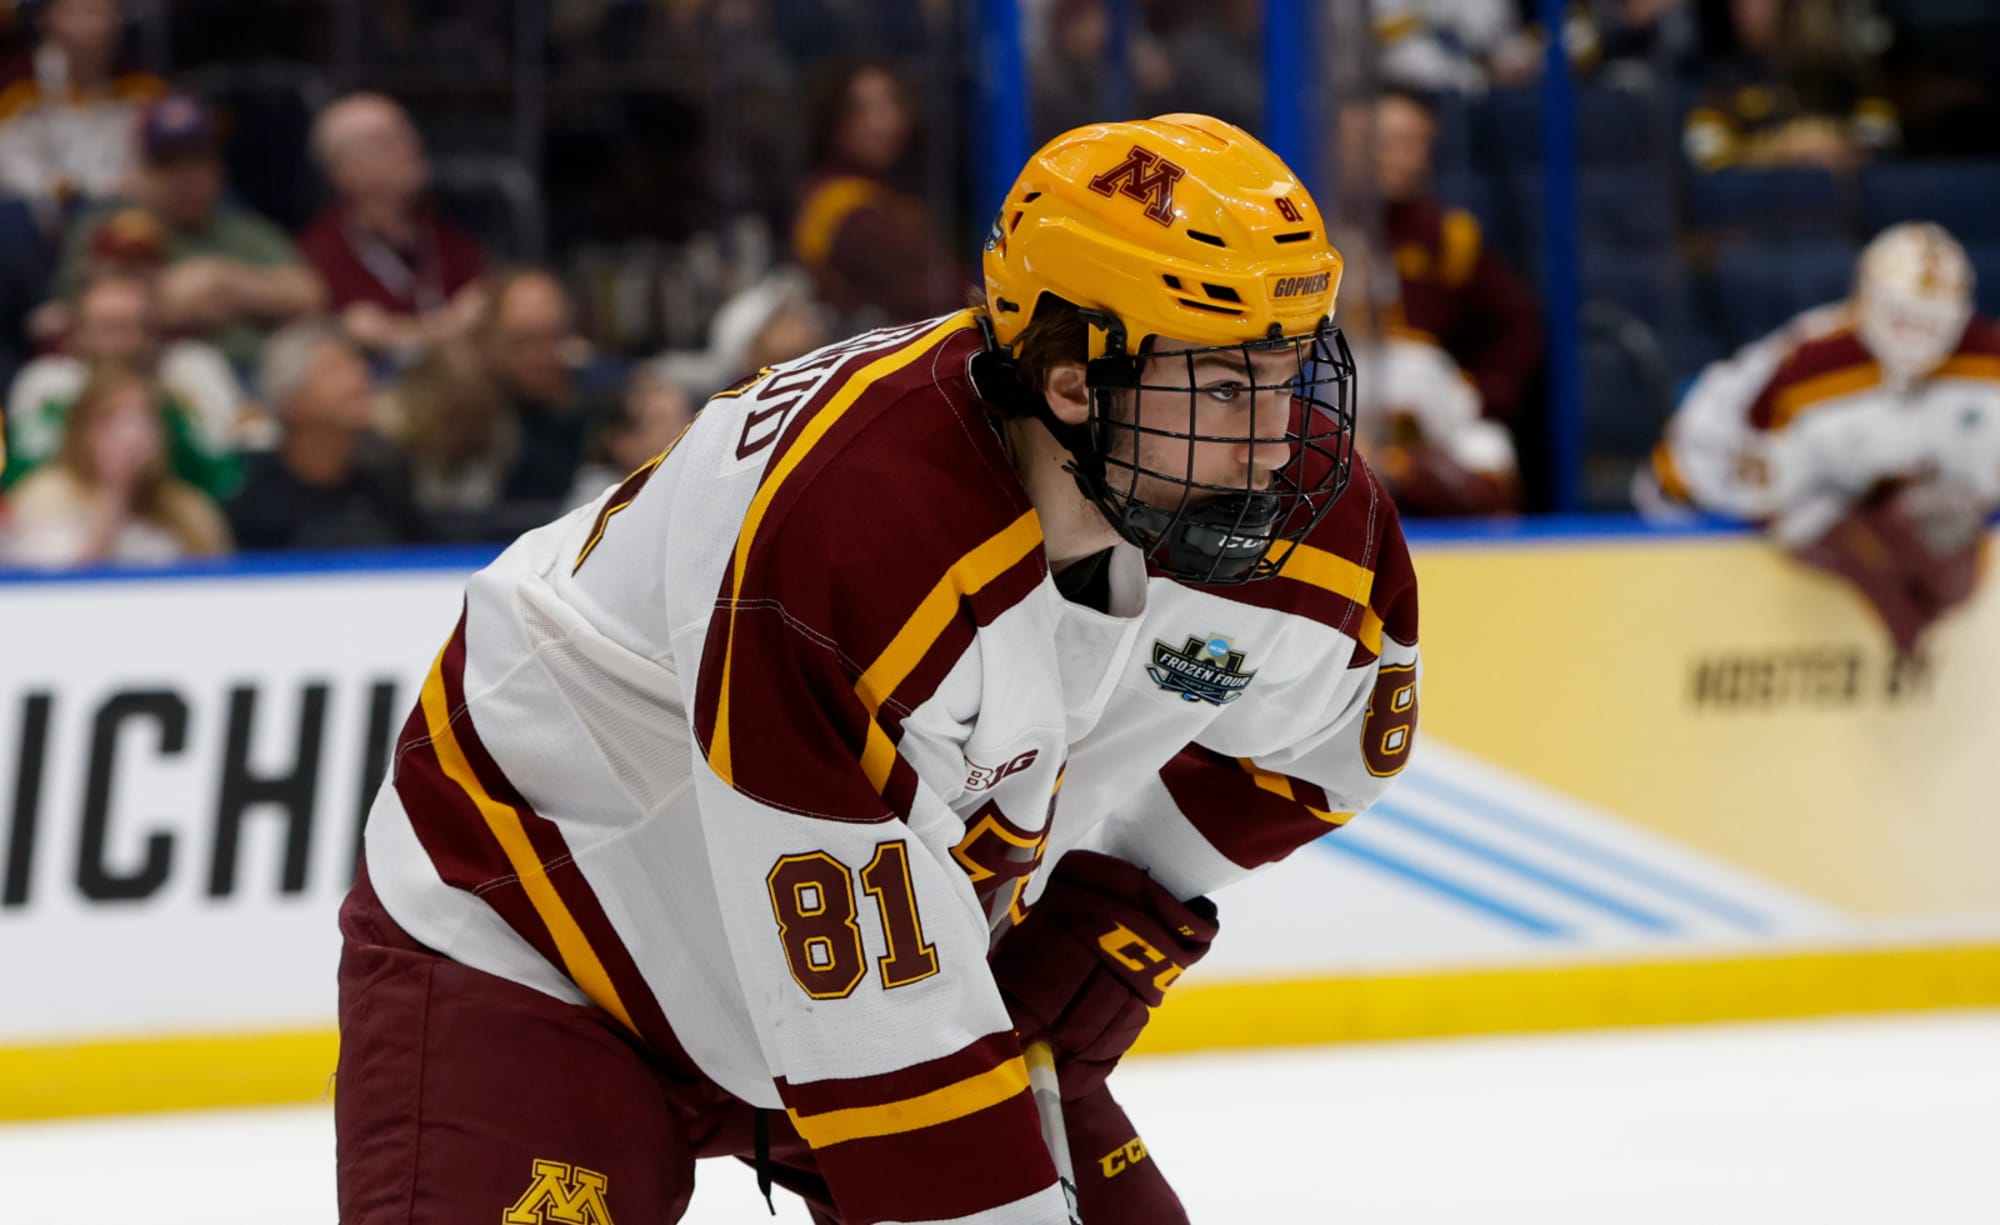 Reloaded Boston College men's hockey team is off to a promising